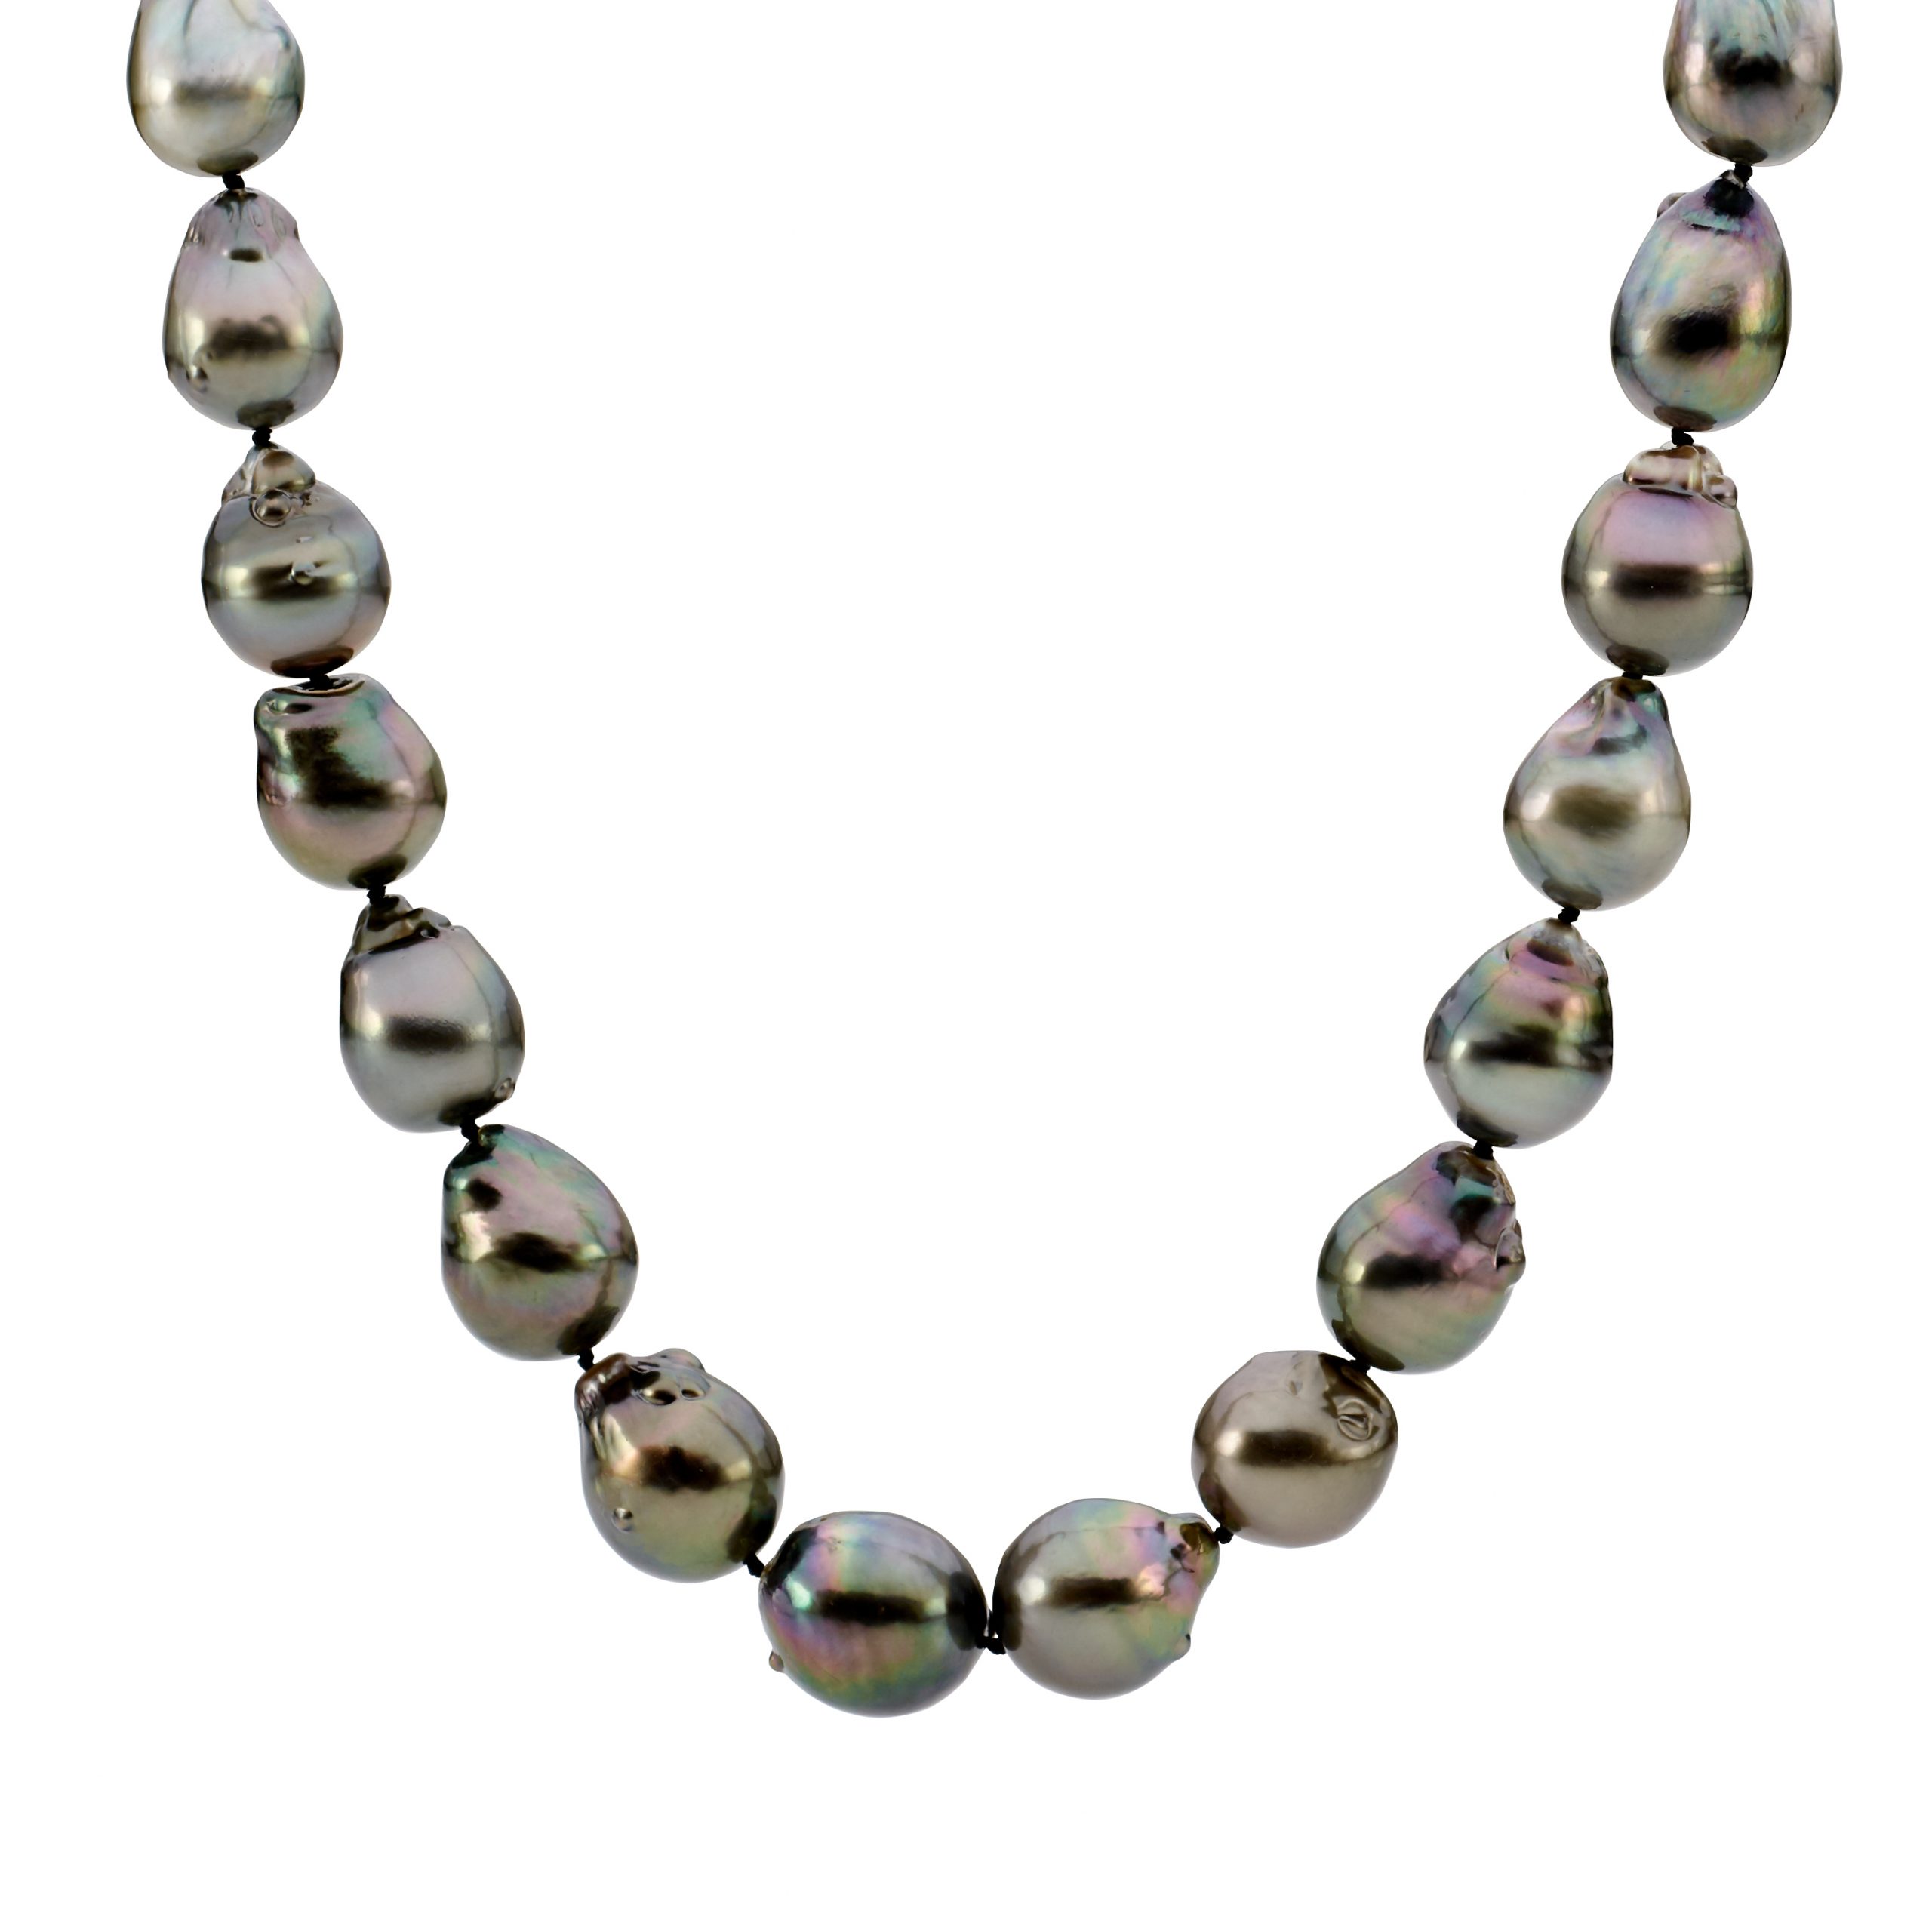 Buy Multi Color Tahitian Pearl Necklace, 11-12 Mm, Natural Color Tahitian  Cultured Pearl Necklace Baroque Online in India - Etsy